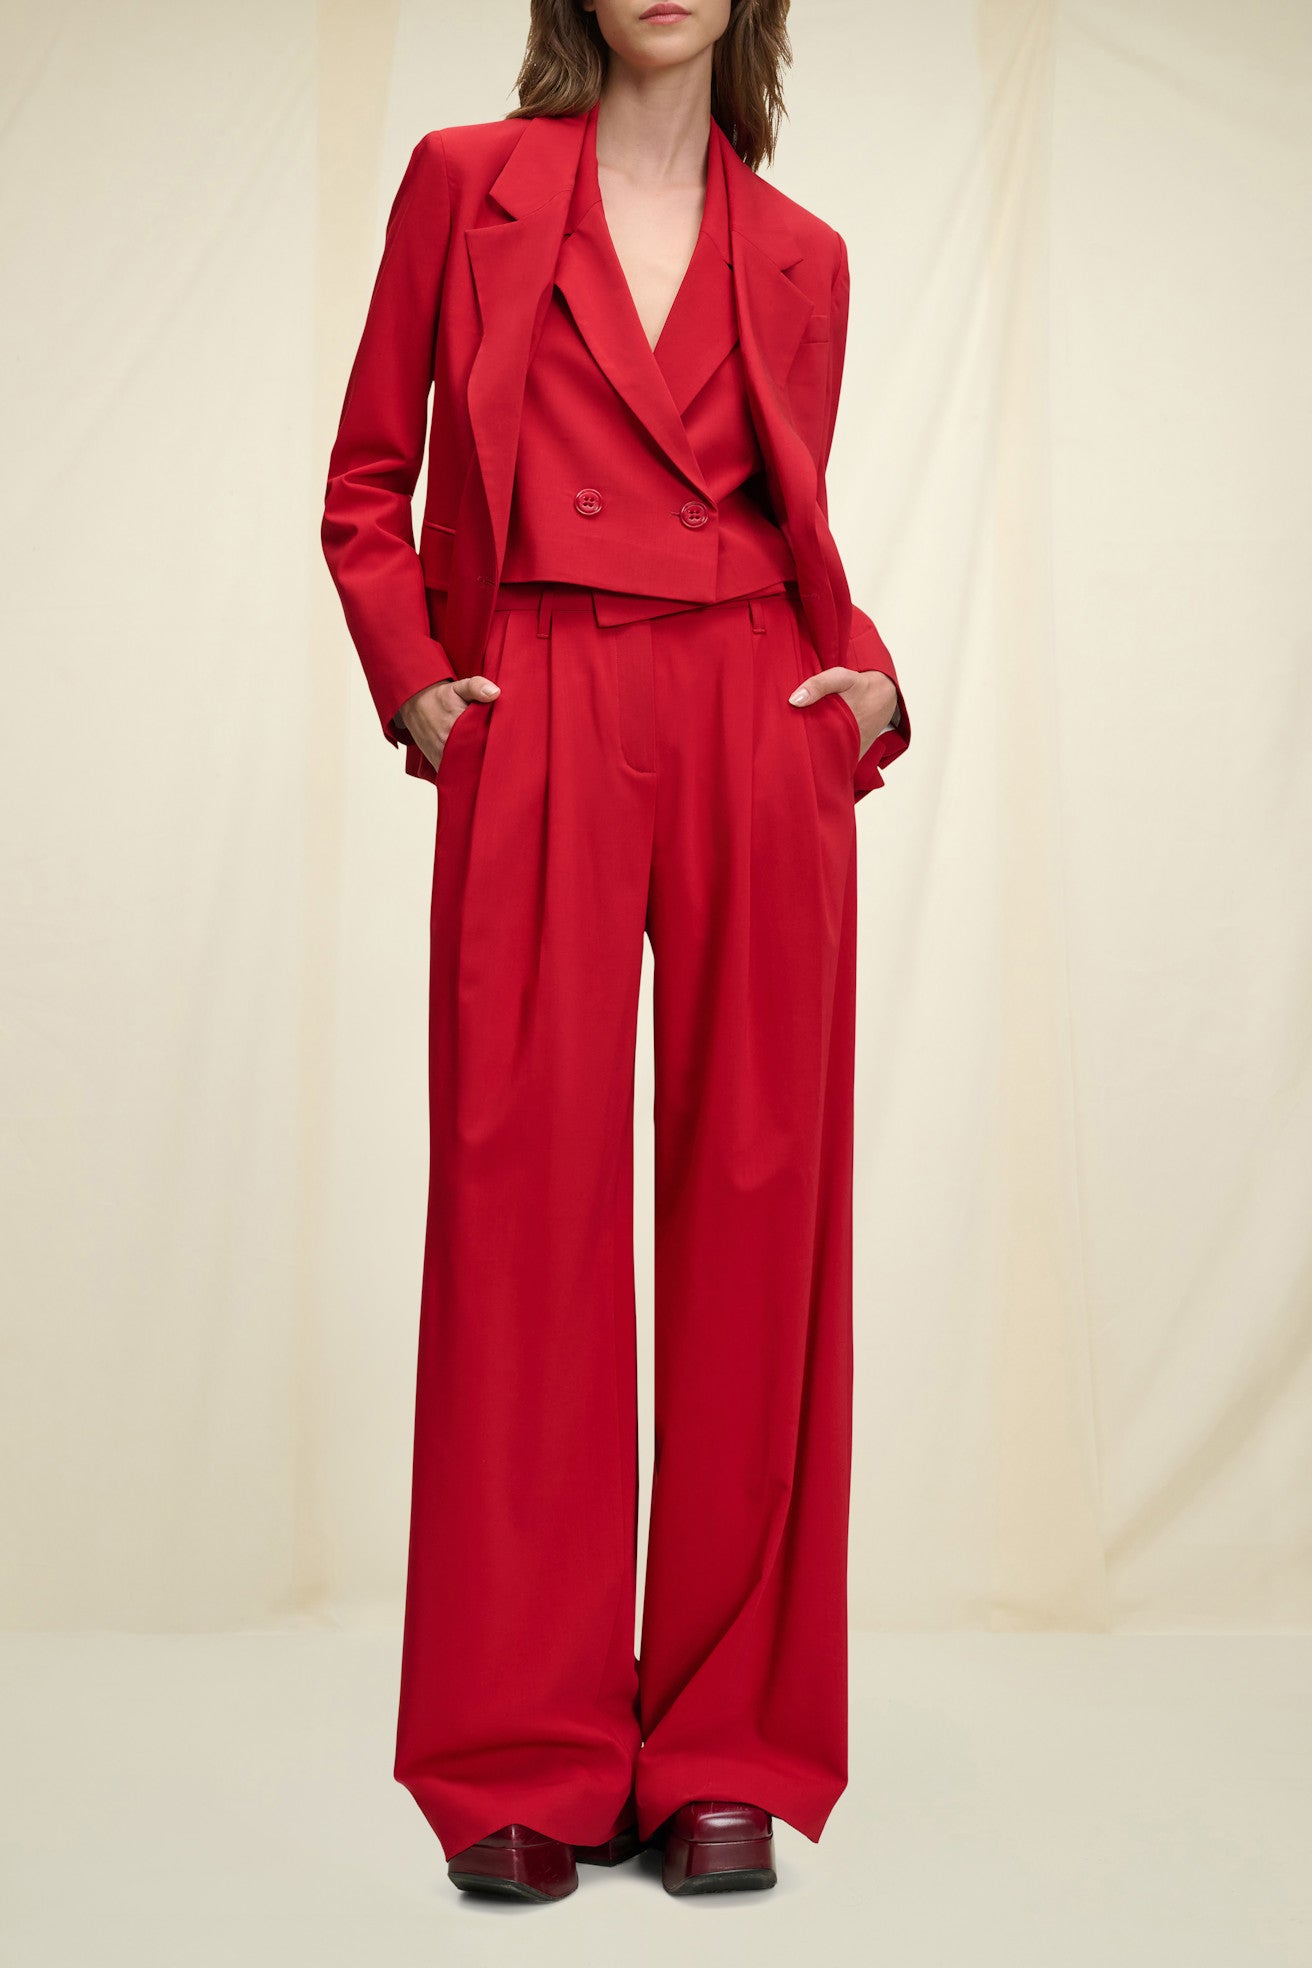 Modern sophistication pants by Dorothee Schumacher